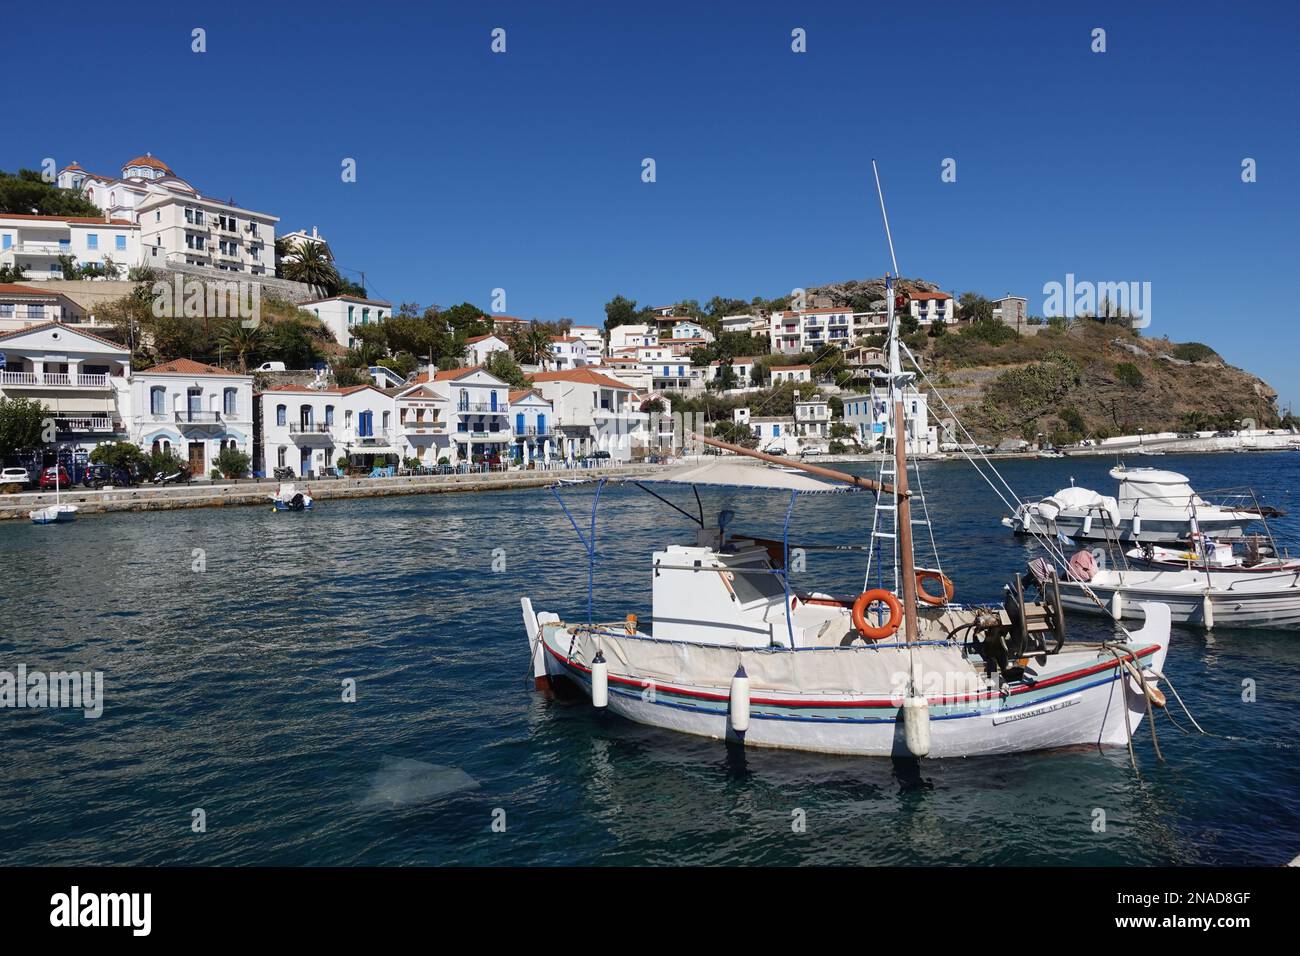 Small typical Greek fishing boat in the quaint harbour in Evdilos, Ikaria, Greece Stock Photo